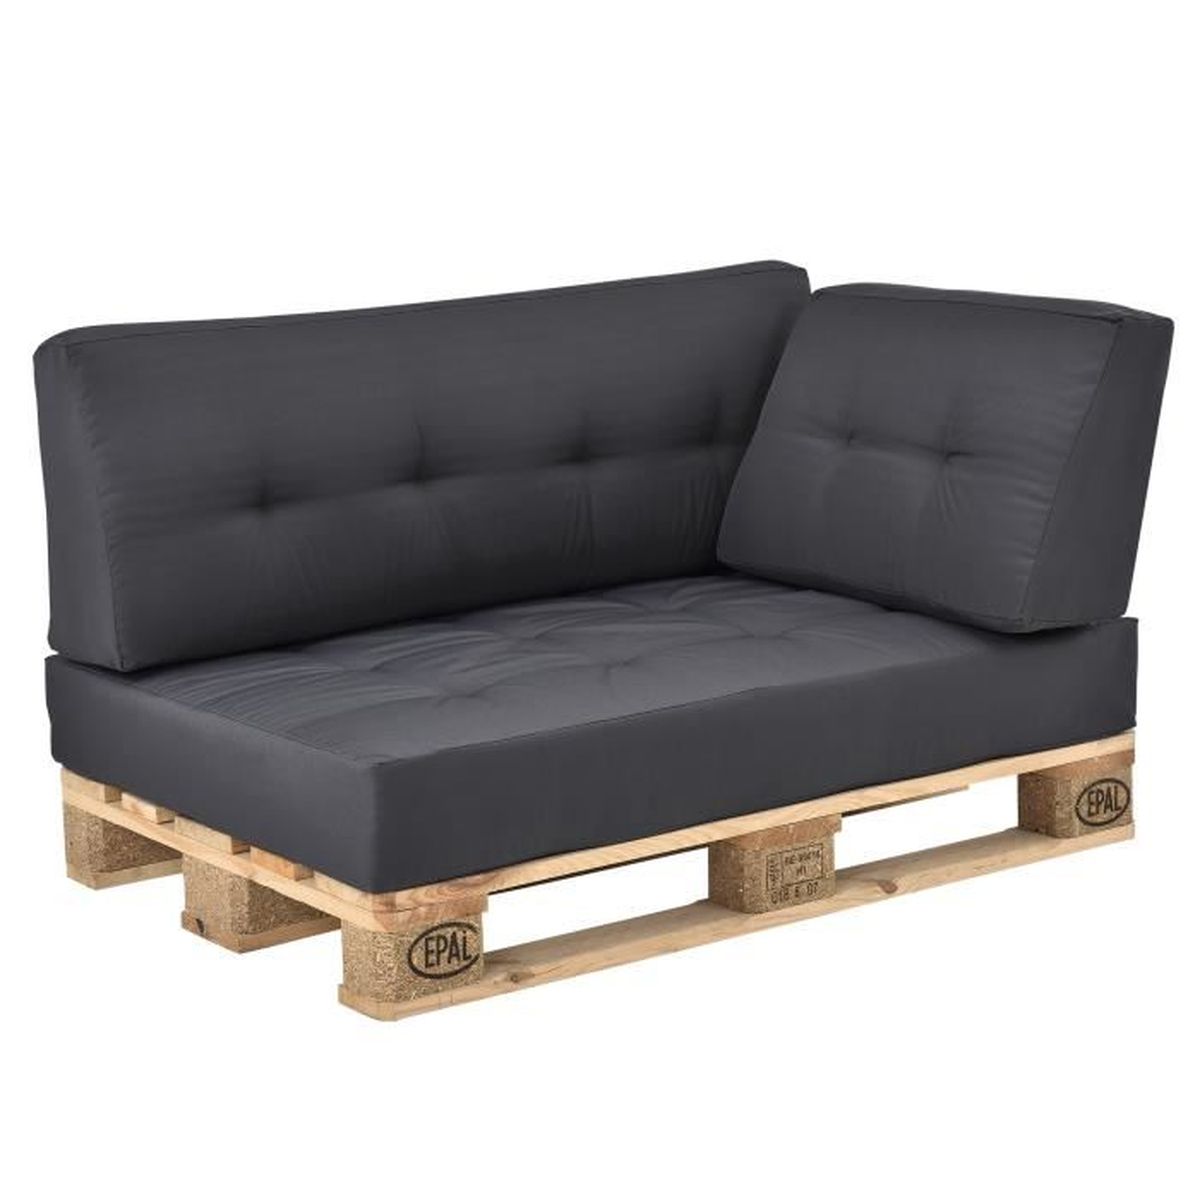 Pallet indoor and out chaise Lounge to stretch your legs on